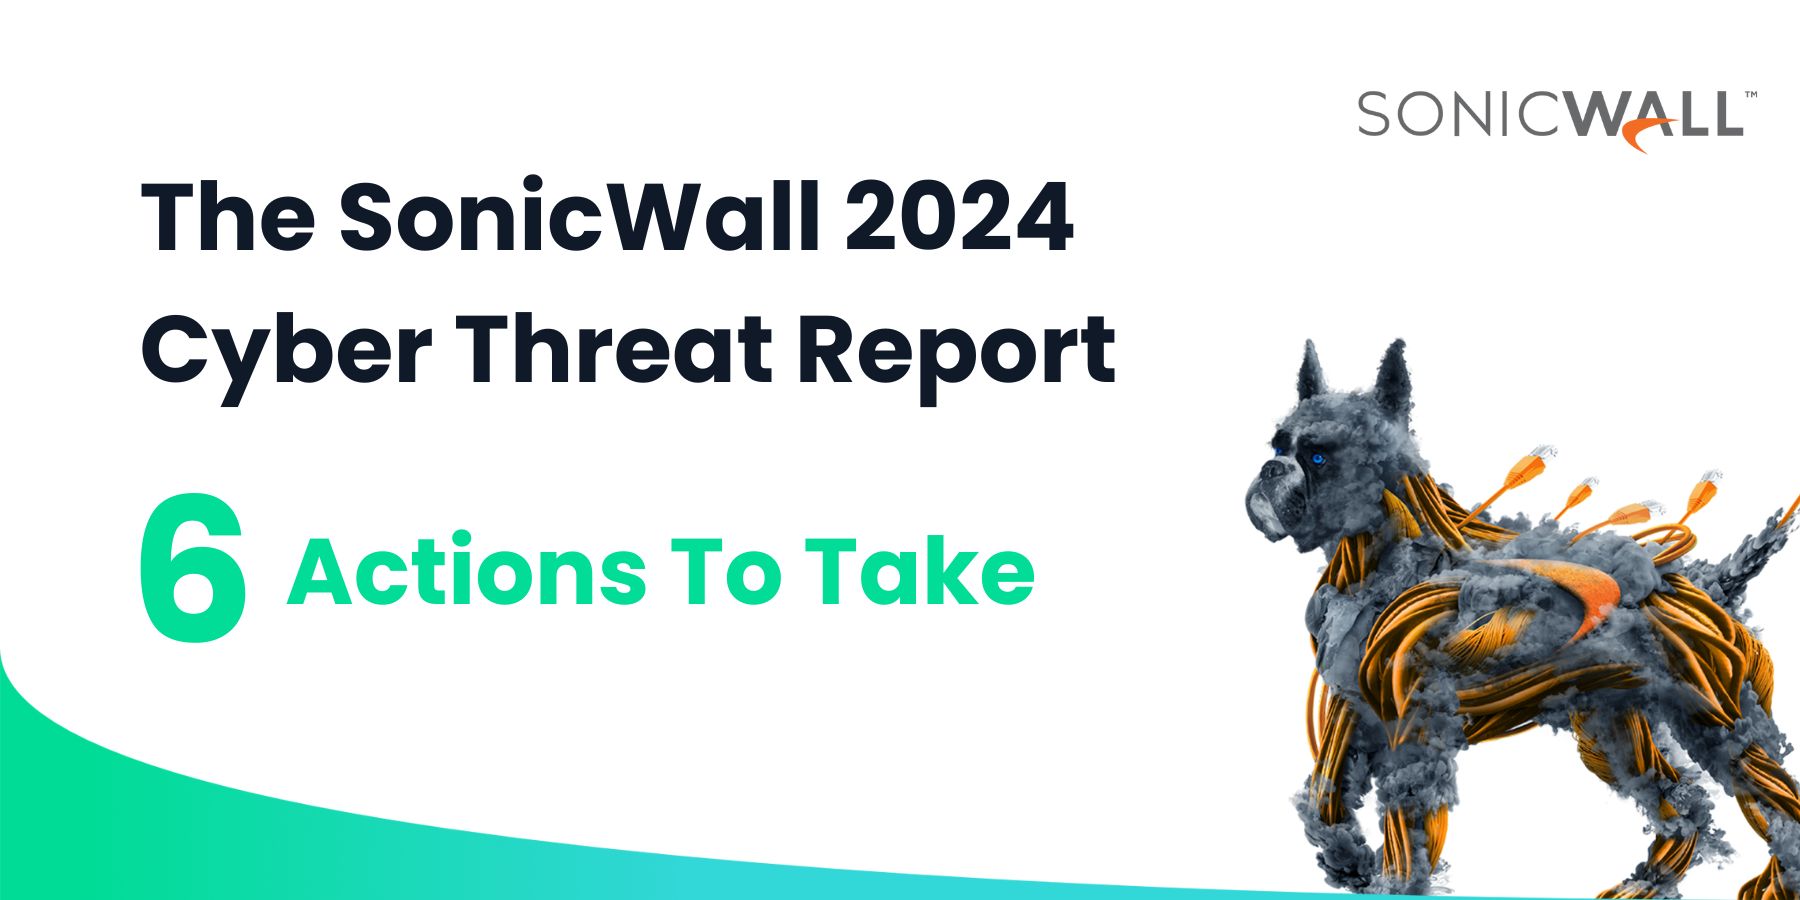 Cybersecurity Report from SonicWall